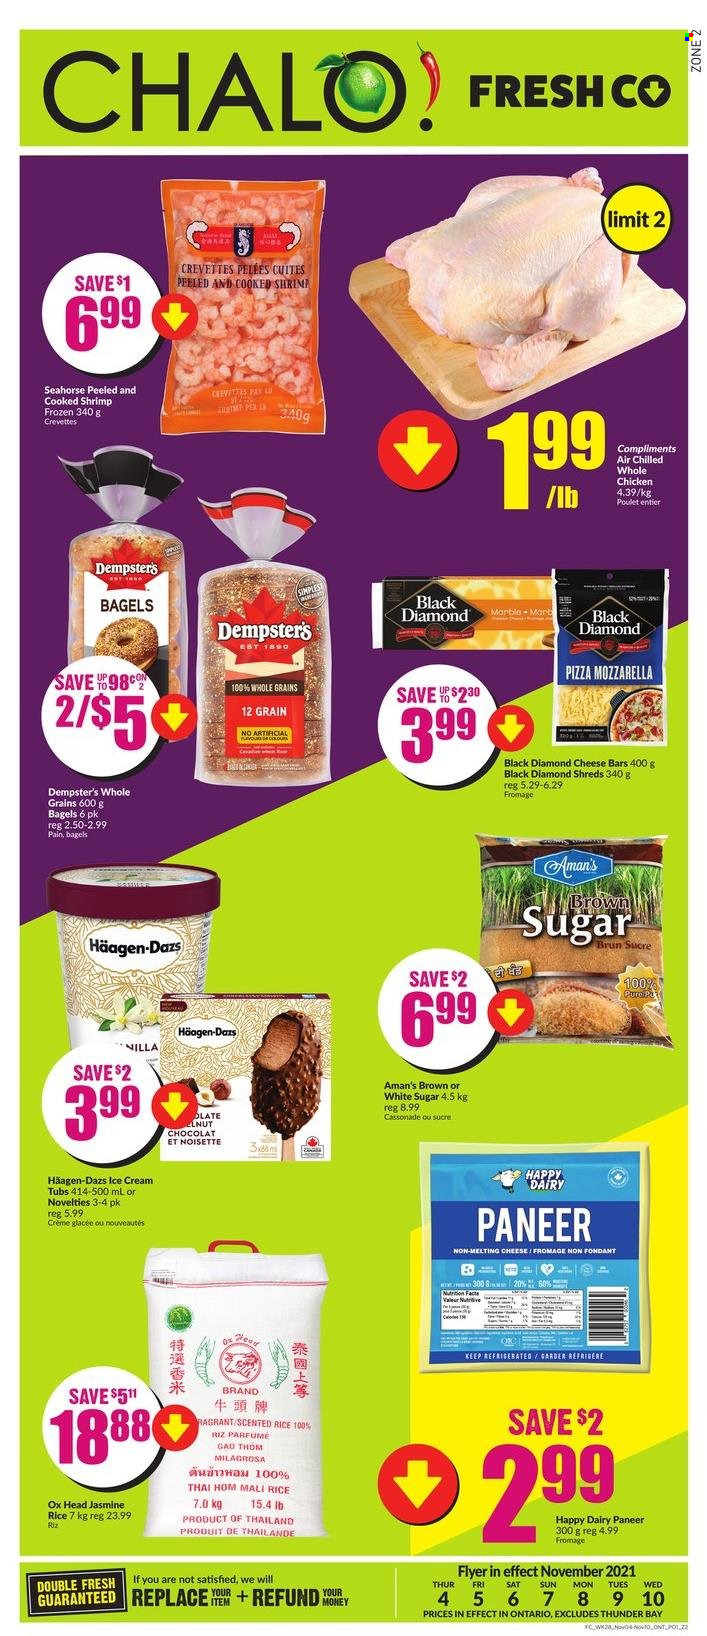 Chalo! FreshCo. Flyer - November 04, 2021 - November 10, 2021 - Sales products - bagels, shrimps, pizza, paneer, ice cream, Häagen-Dazs, sugar, rice, whole chicken, chicken meat. Page 1.